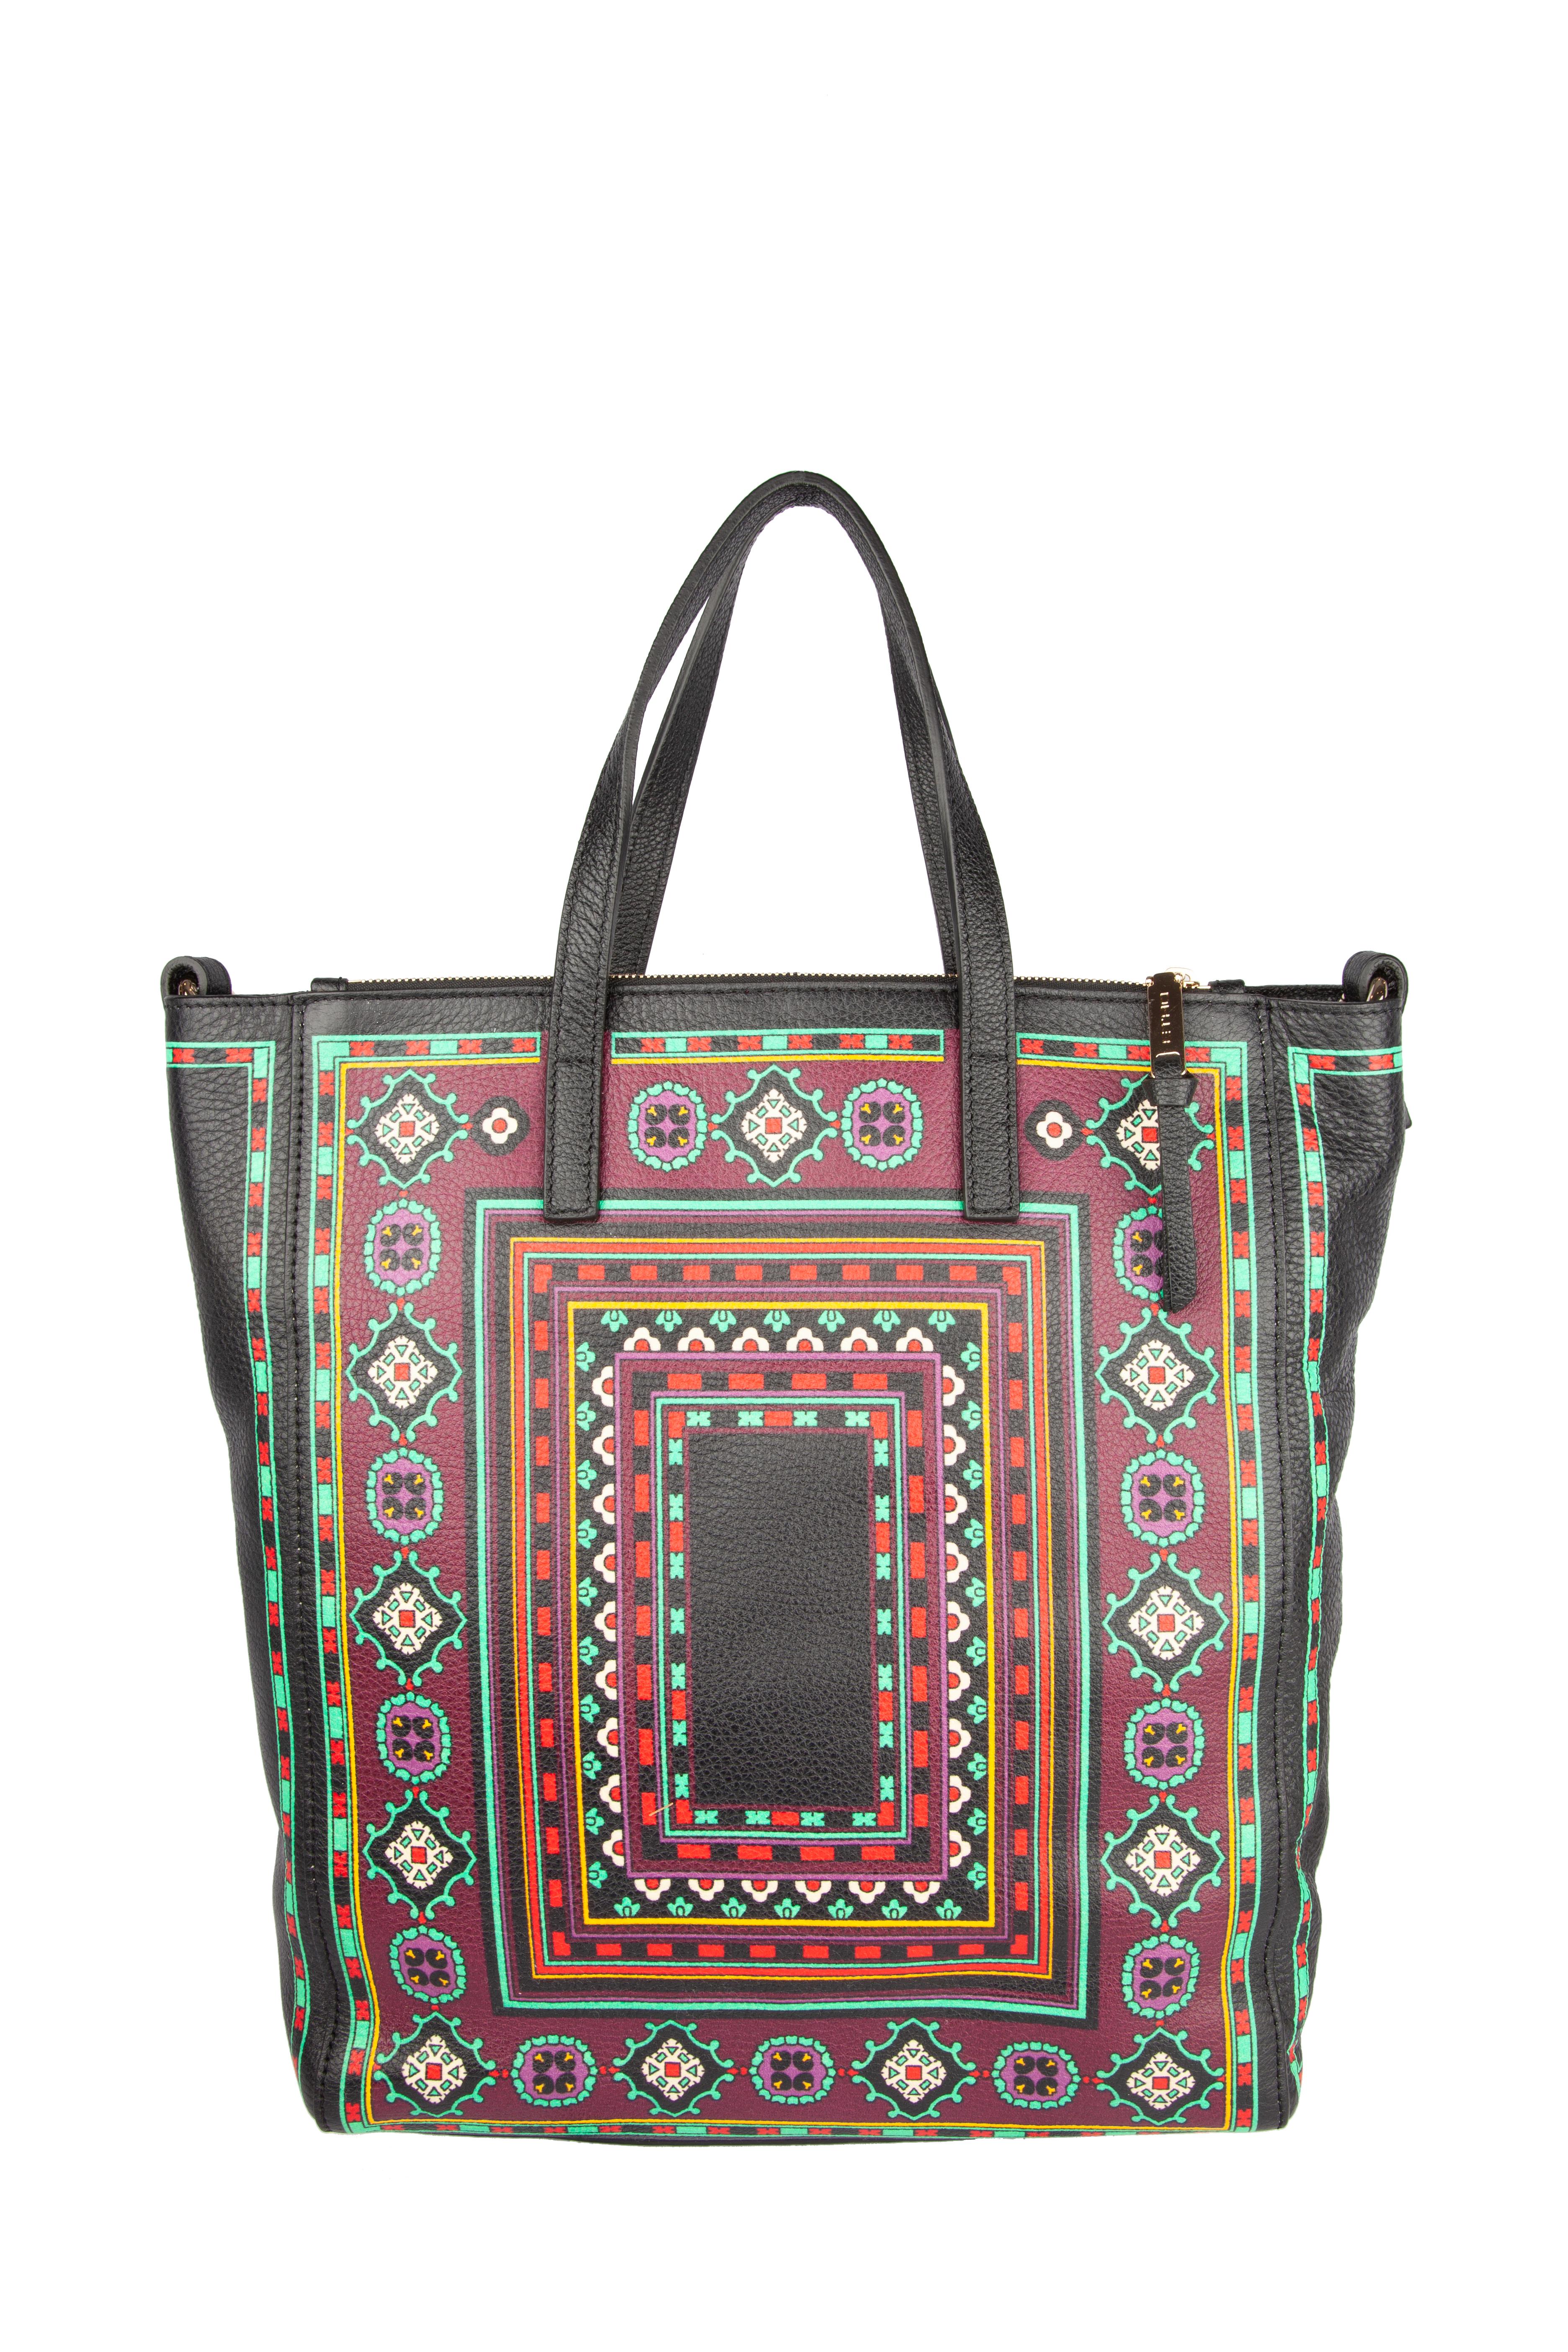 This Etro leather shopping tote bag features a southwest inspired print, zipper compartment, and a beautifully embroidered detachable strap. Brand new with tags. Made in Italy.

Dimensions: 13 x 10 x 4 inches approximately  

Material: Leather 